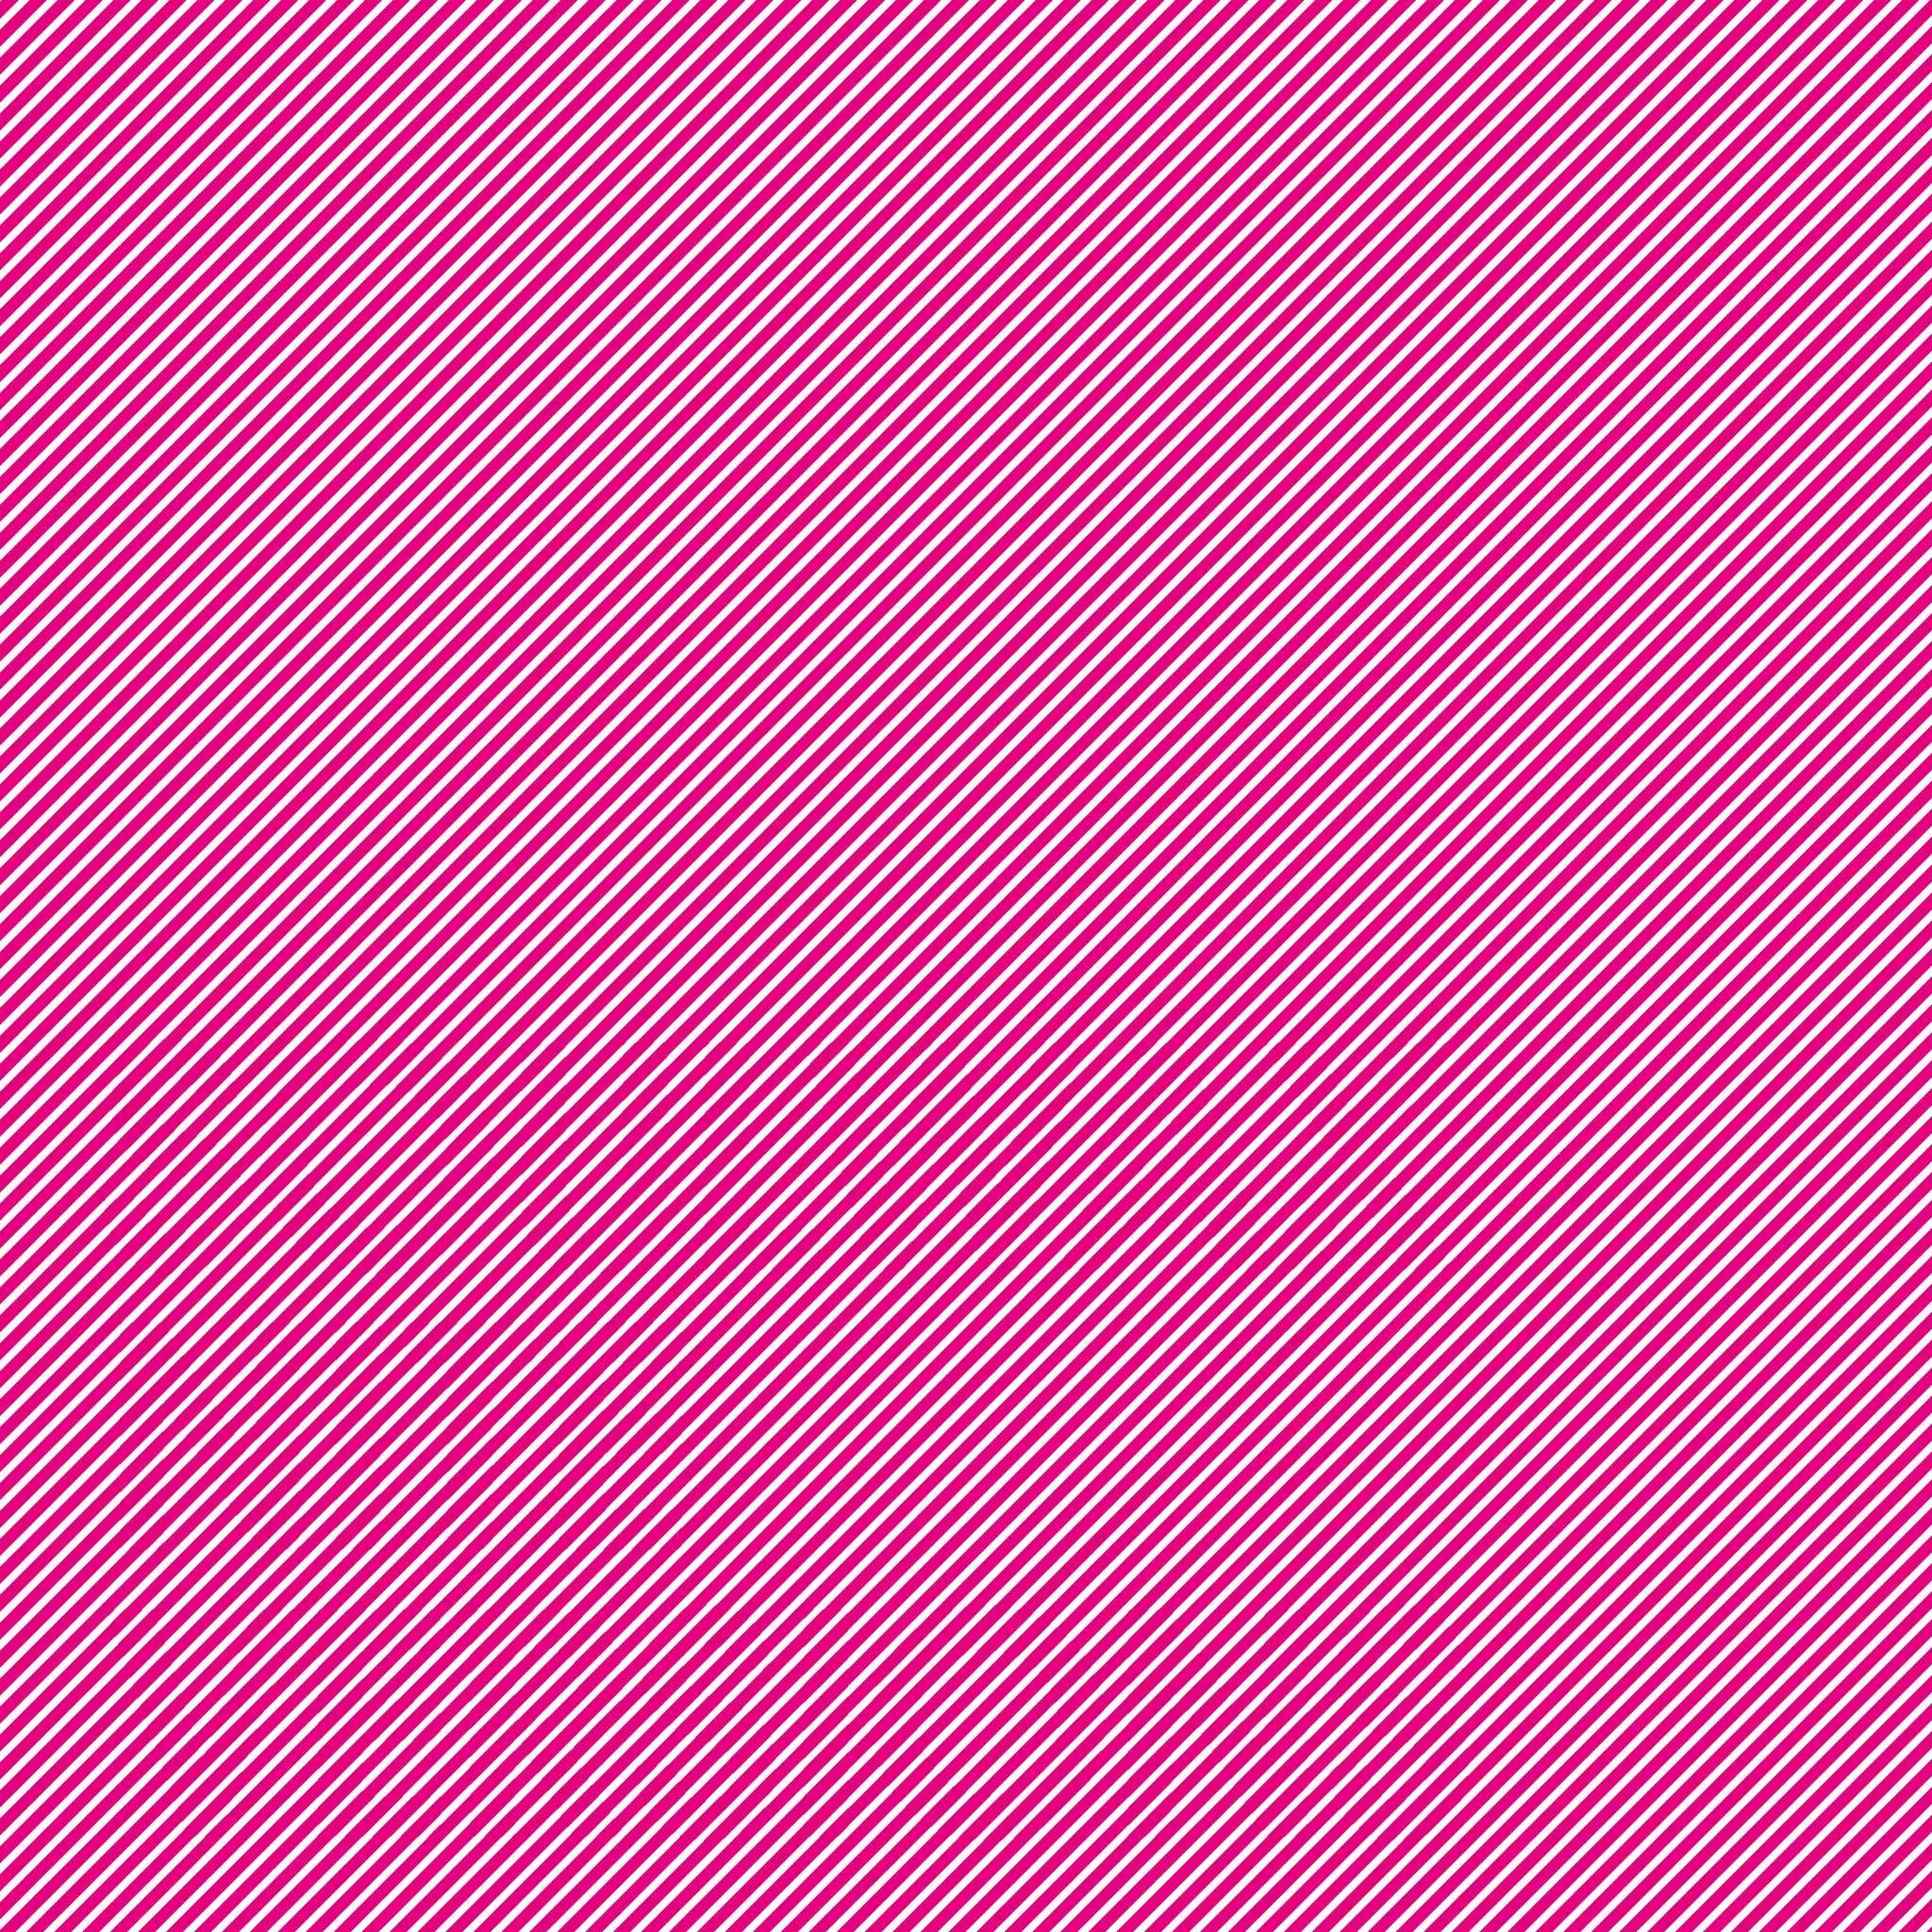 <strong>Soulwax - Nite Versions</strong> (Cd)